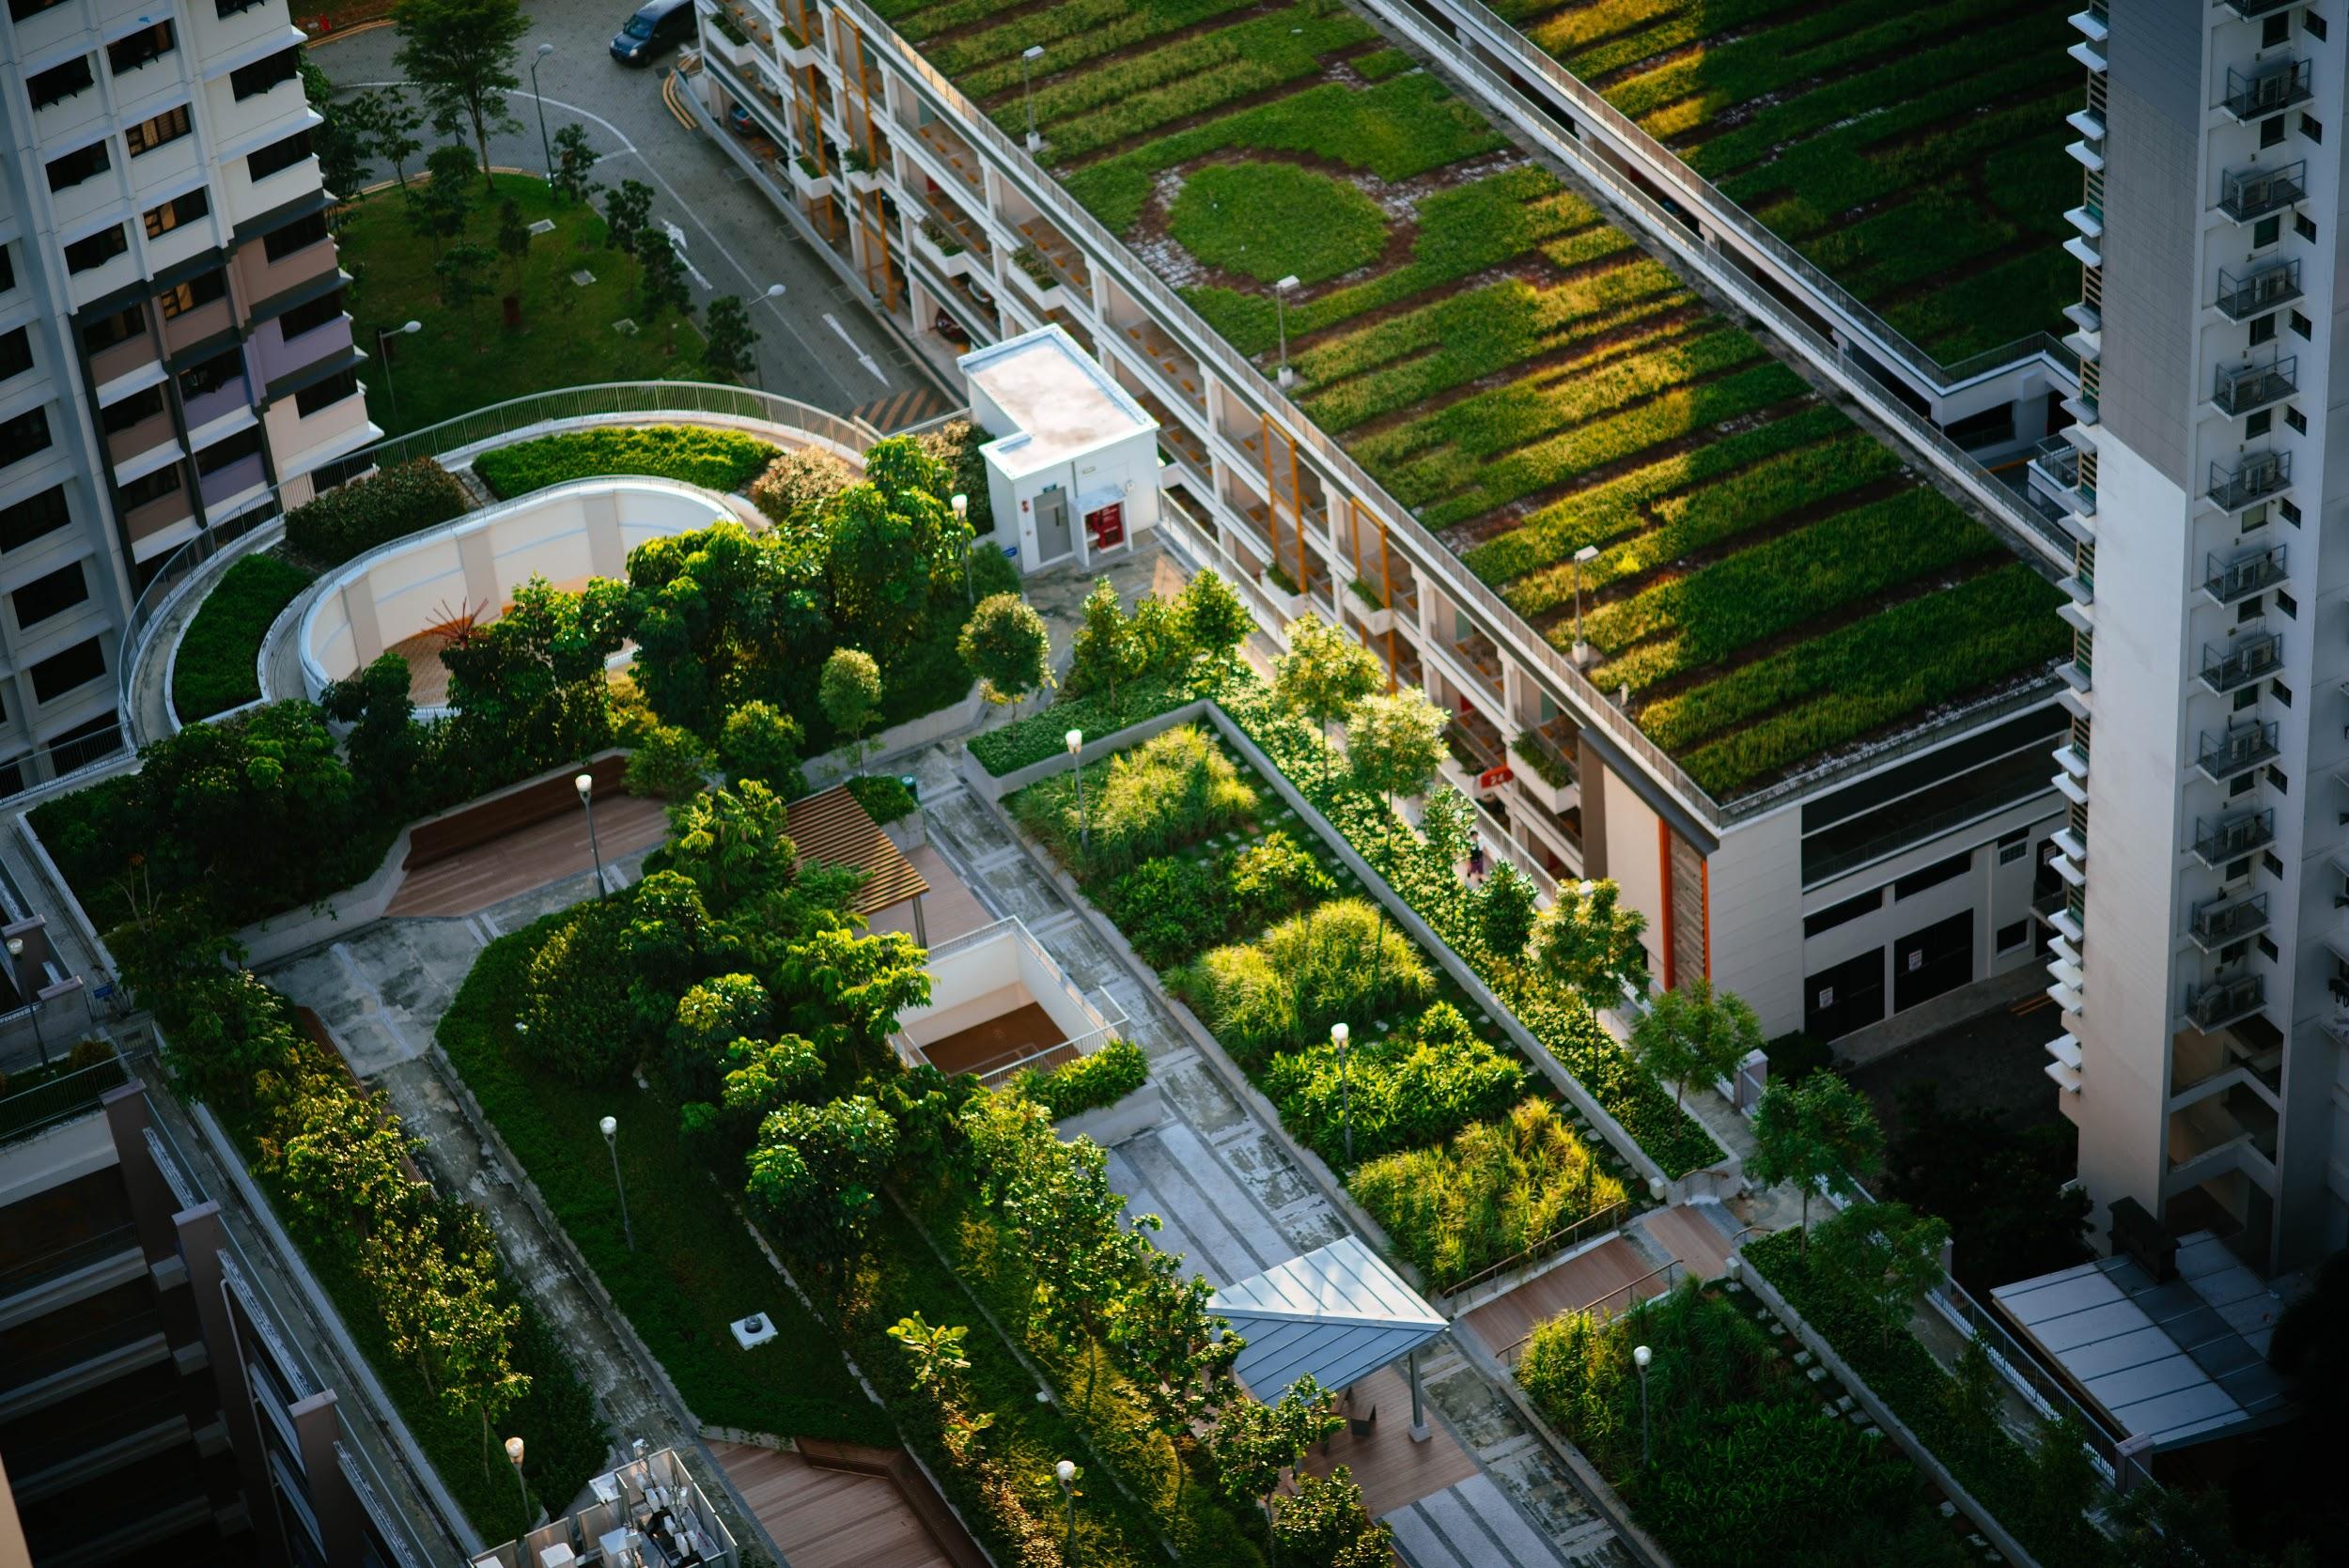 'Green roofs' such as these not only have environmental benefits, but a study shows they also strengthen your attention skills if you look at them during a micro-break.